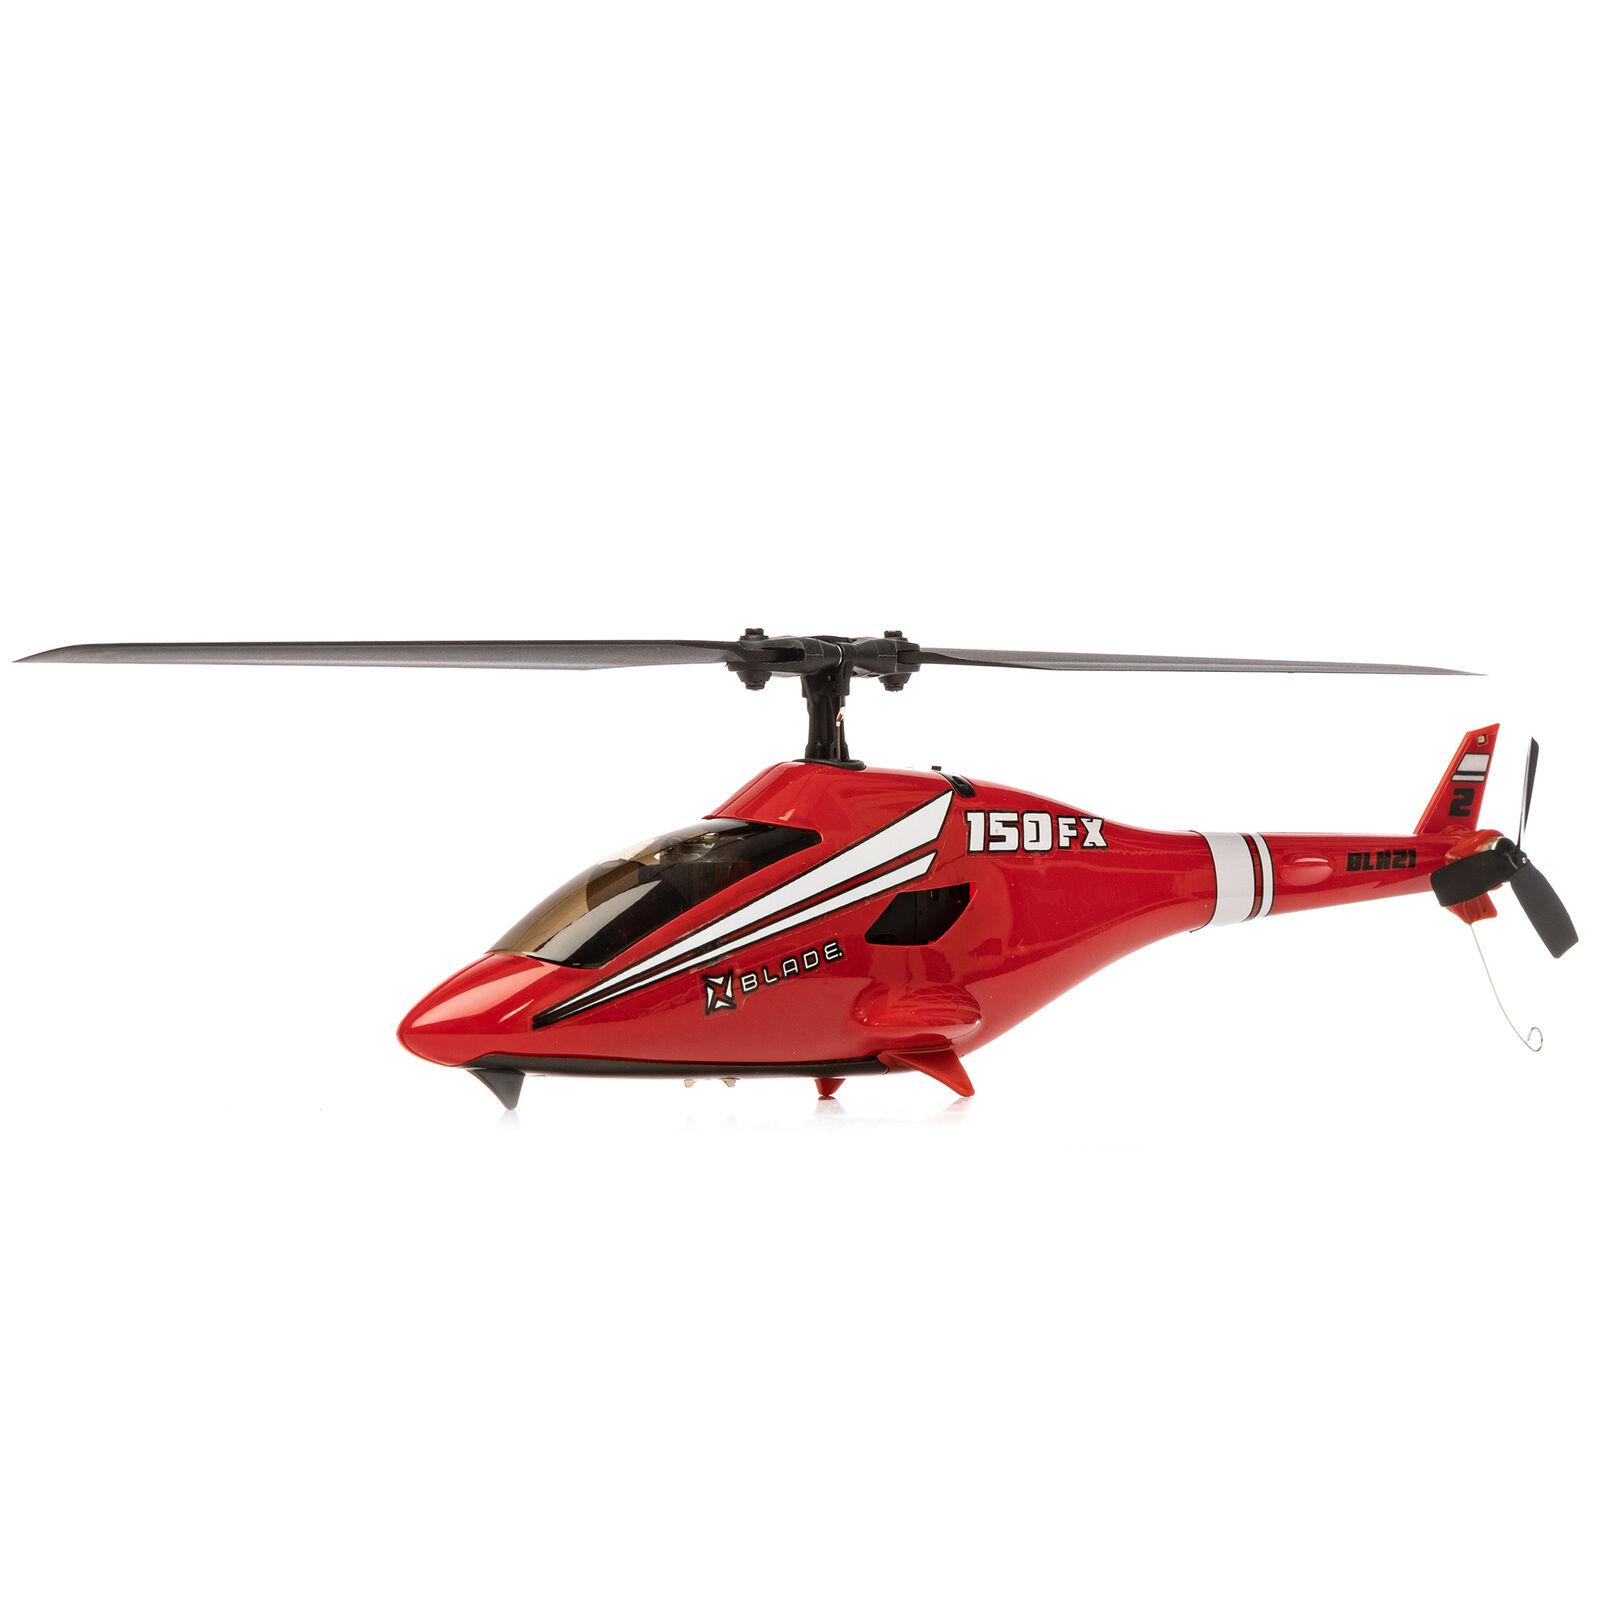 Rc Heli 101: Choosing the Perfect RC Heli for You